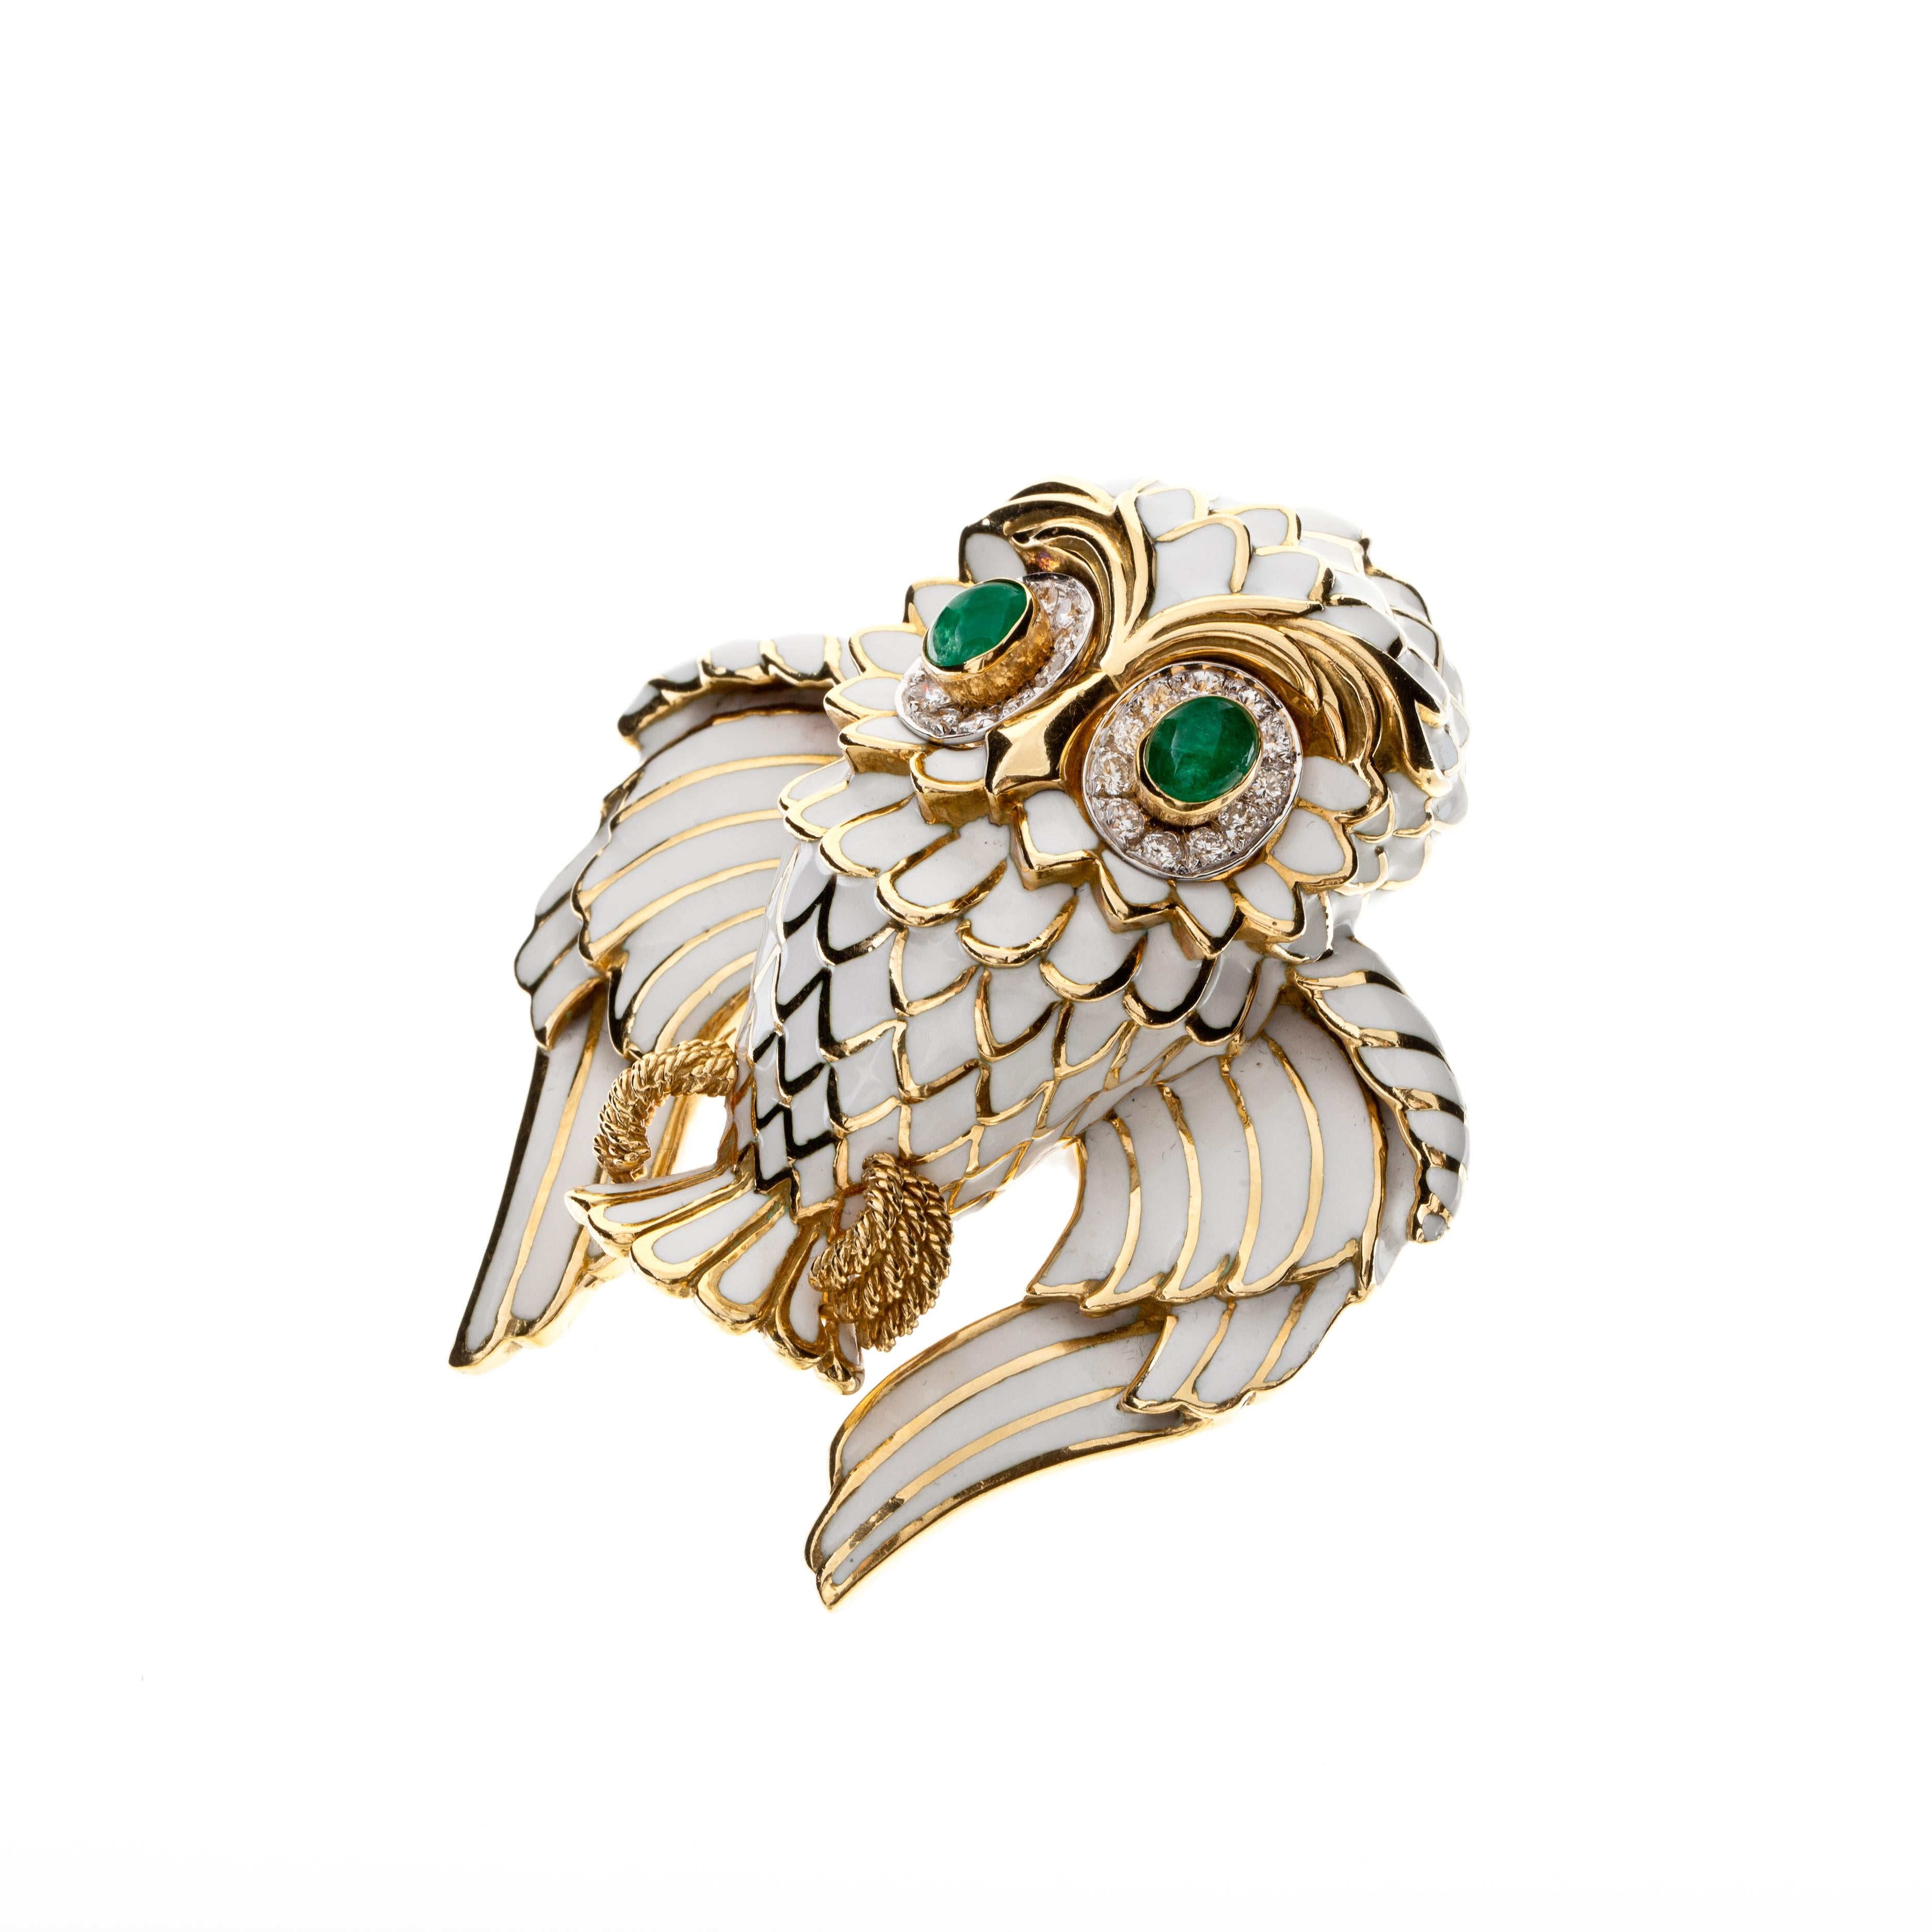 David Webb owl brooch in 18K yellow gold and platinum with white enamel, diamonds and emeralds.  It is marked 